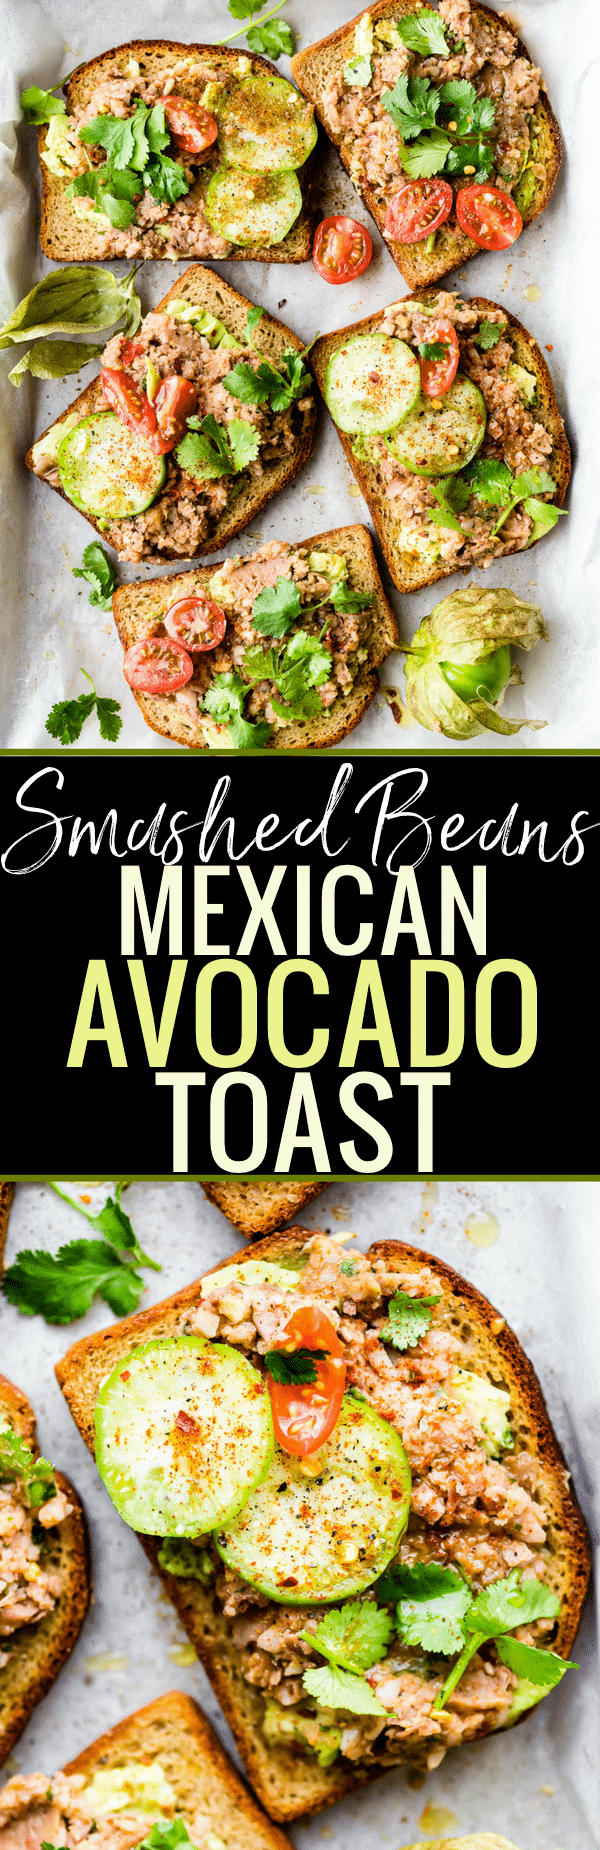 Gluten Free Smashed Mexican Beans Avocado Toast recipe! A heartier yet Healthy take on Avocado Toast Recipes. This Fully Loaded MEXICAN style avocado toast is Vegan Friendly and loaded with Flavor!! A simple, yet spicy, meatless meal, breakfast, or even a quick appetizer. www.cottercrunch.com